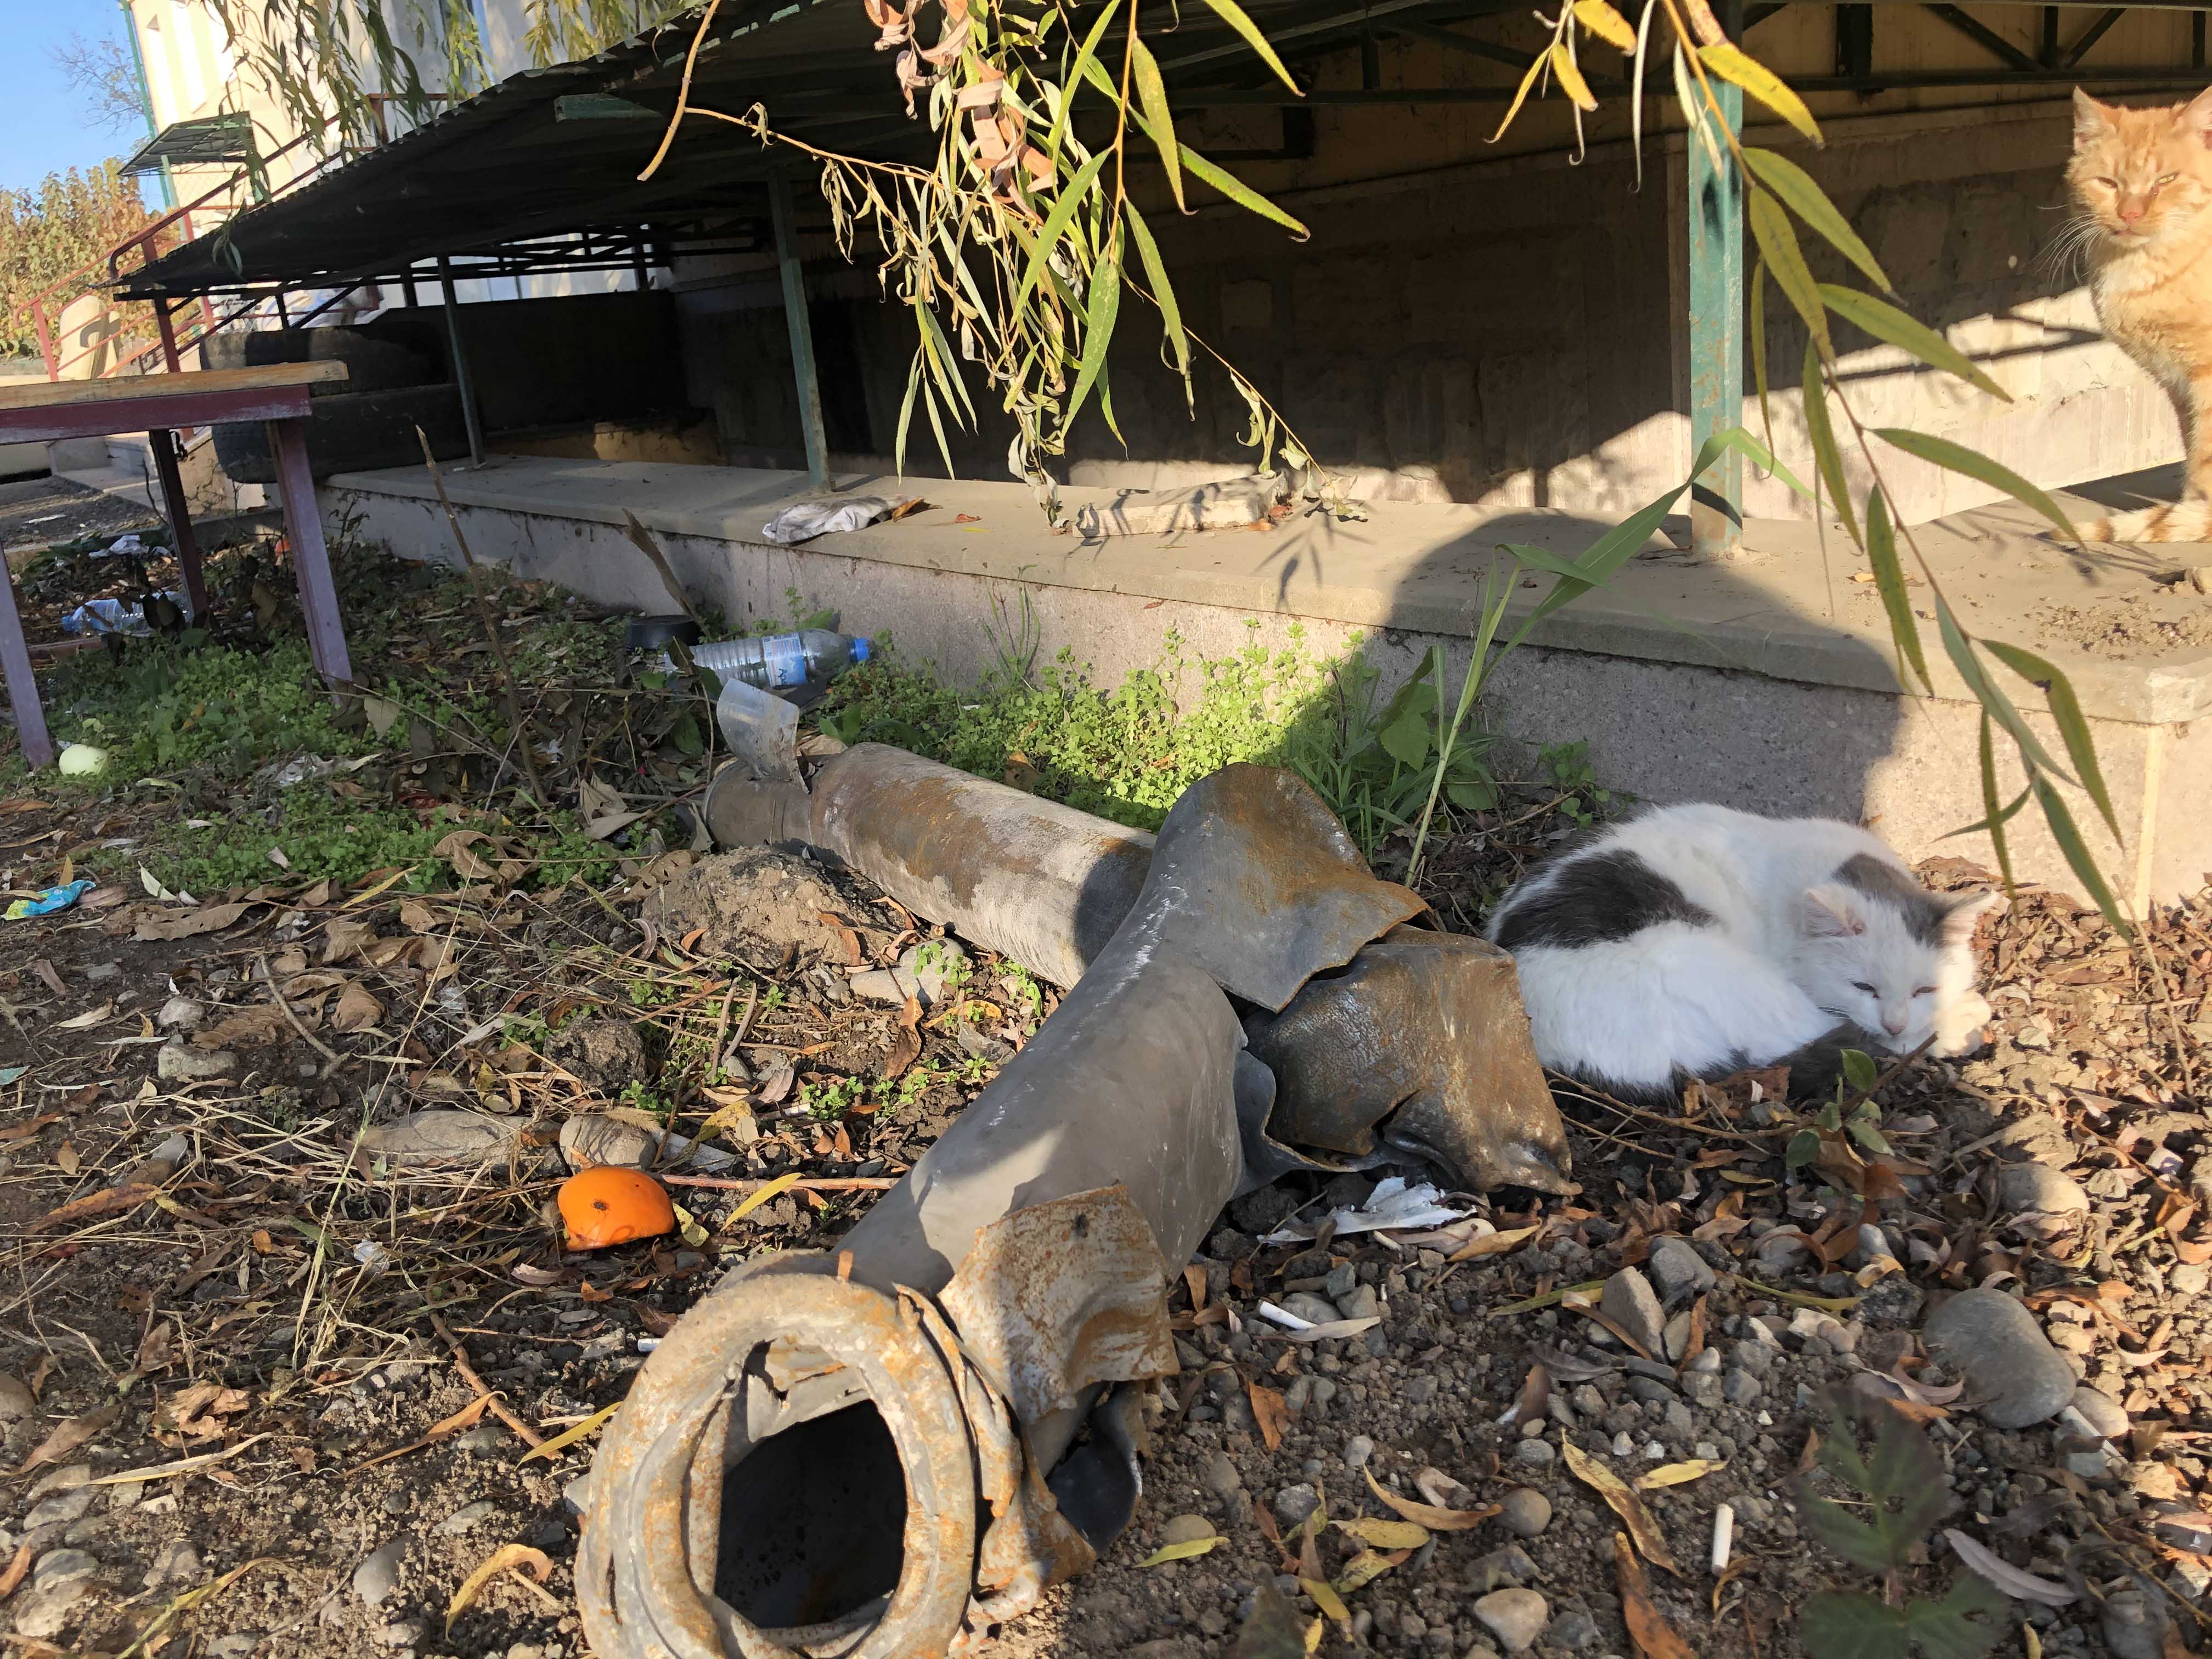 A remnant of an LAR-160 cluster munition rocket found by Human Rights Watch in the yard of the Martakert public hospital.